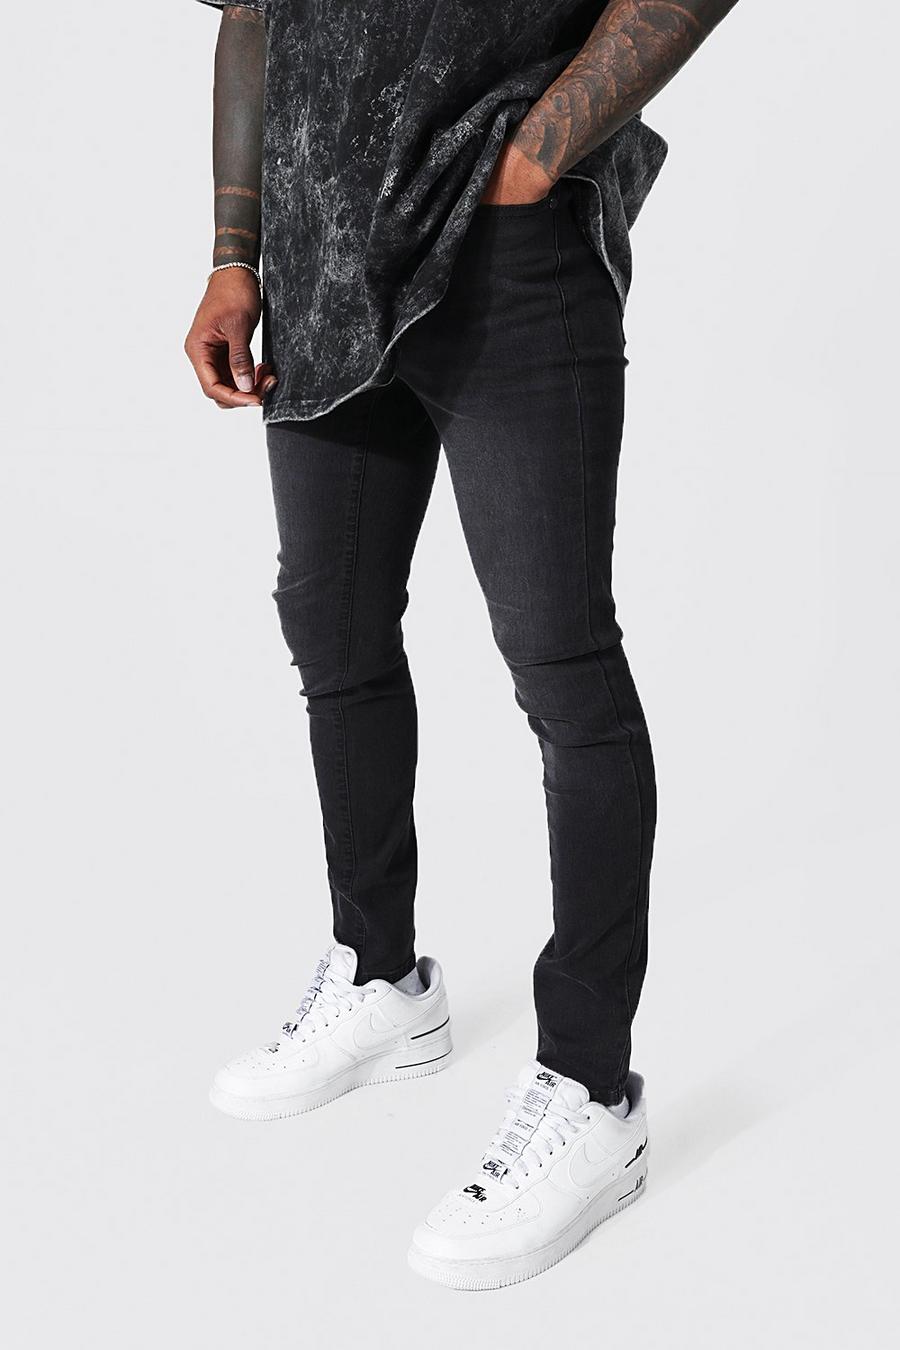 Charcoal gris Super Skinny Fit Jean Contains Organic Cotton